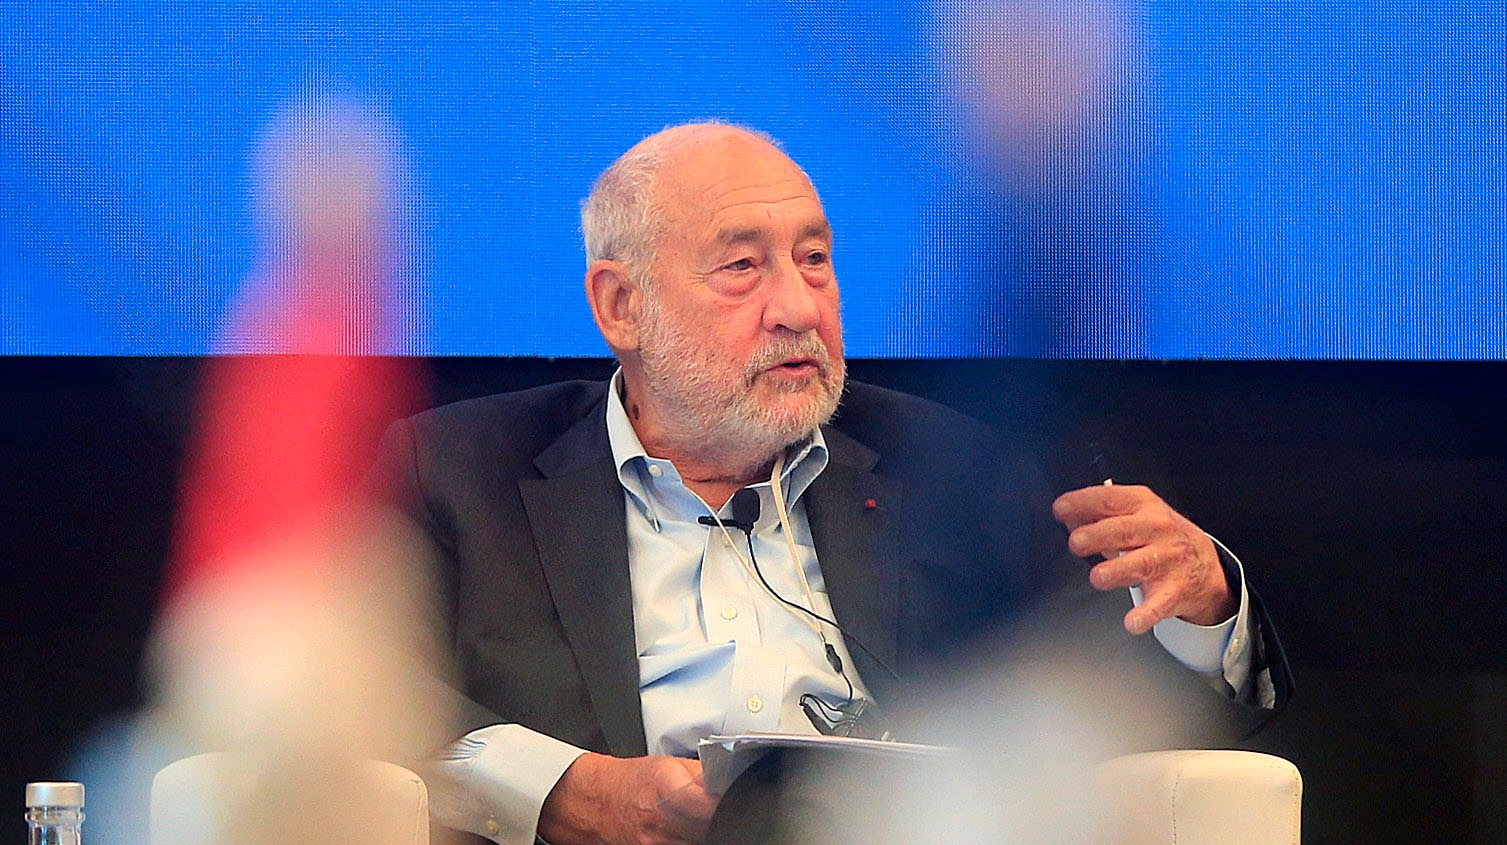 epa10774471 Nobel laureate in economics, American Joseph Stiglitz attends the first Ministerial Summit for an inclusive, sustainable and equitable global taxation that meets in Cartagena de Indias, Colombia, 28 July 2023. Stiglitz, winner of the 2001 Nobel Prize in Economics, advised the countries of the world not to sign the Inclusive Framework of the Organization for Economic Cooperation and Development (OECD) and said &quot;if they have already signed it, they should not ratify it&quot;.  EPA/Ricardo Maldonado Rozo